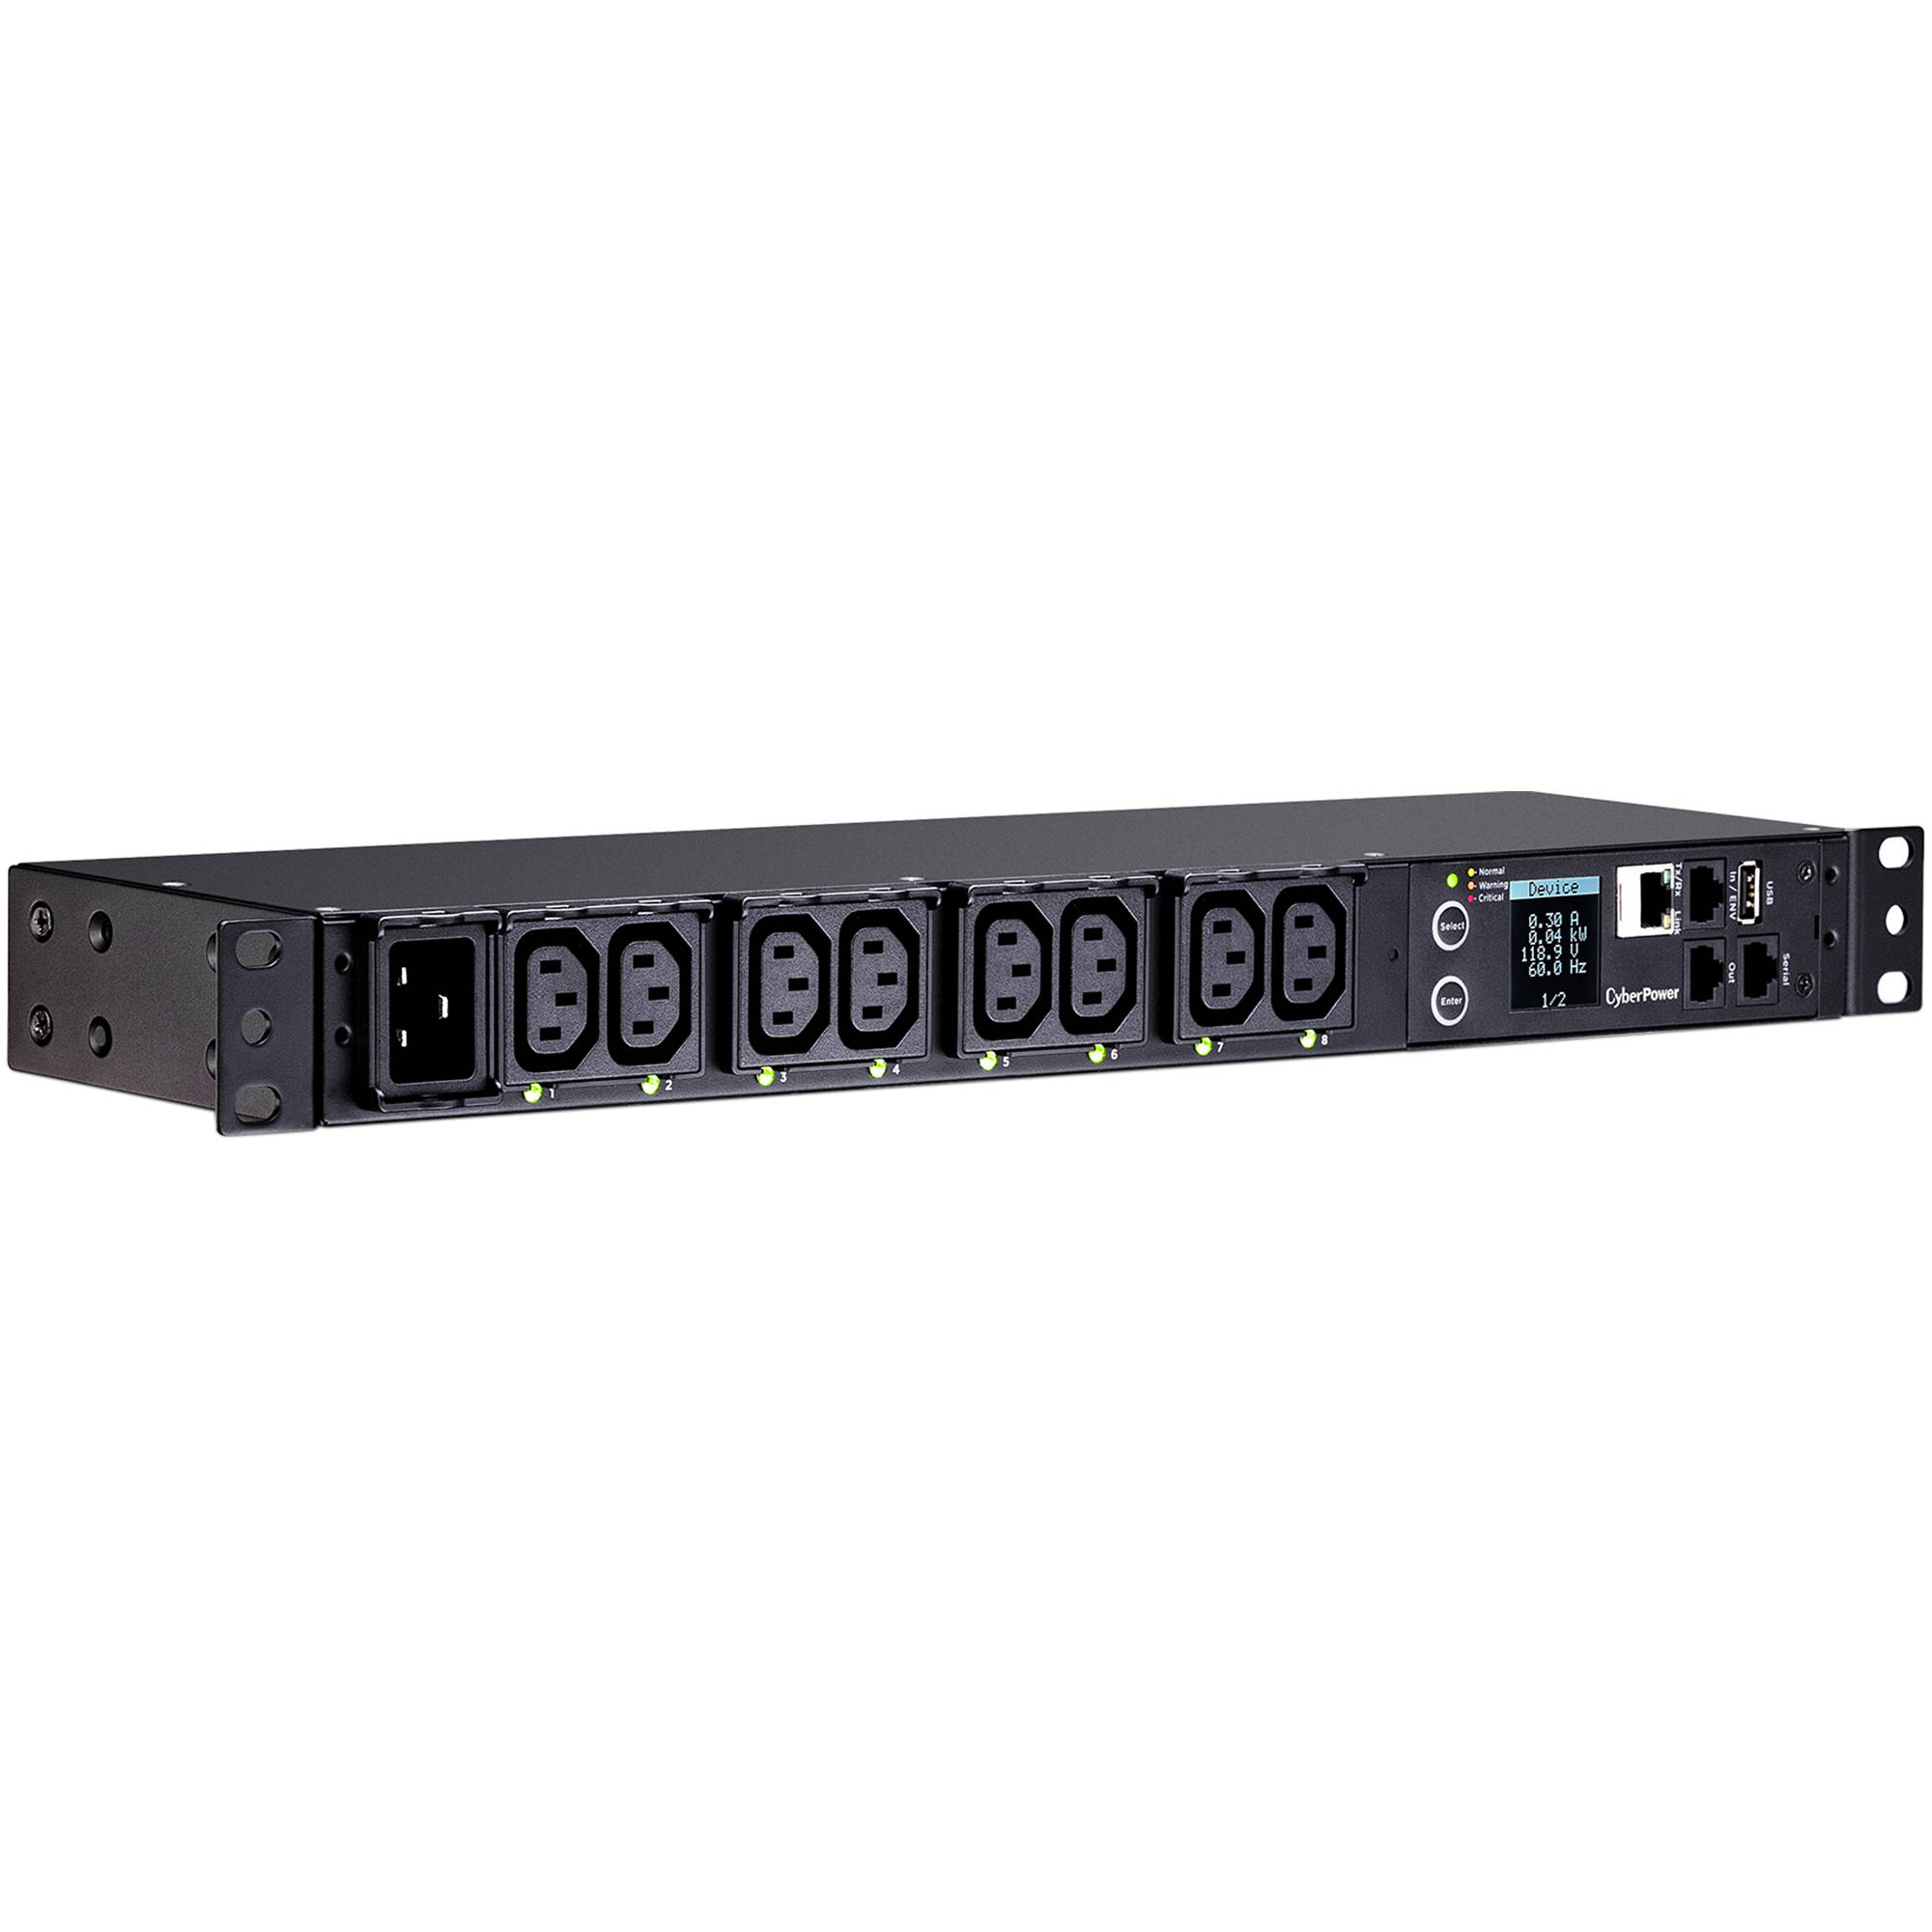 CyberPower PDU81004 Switched Metered-by-Outlet Power Distribution Unit